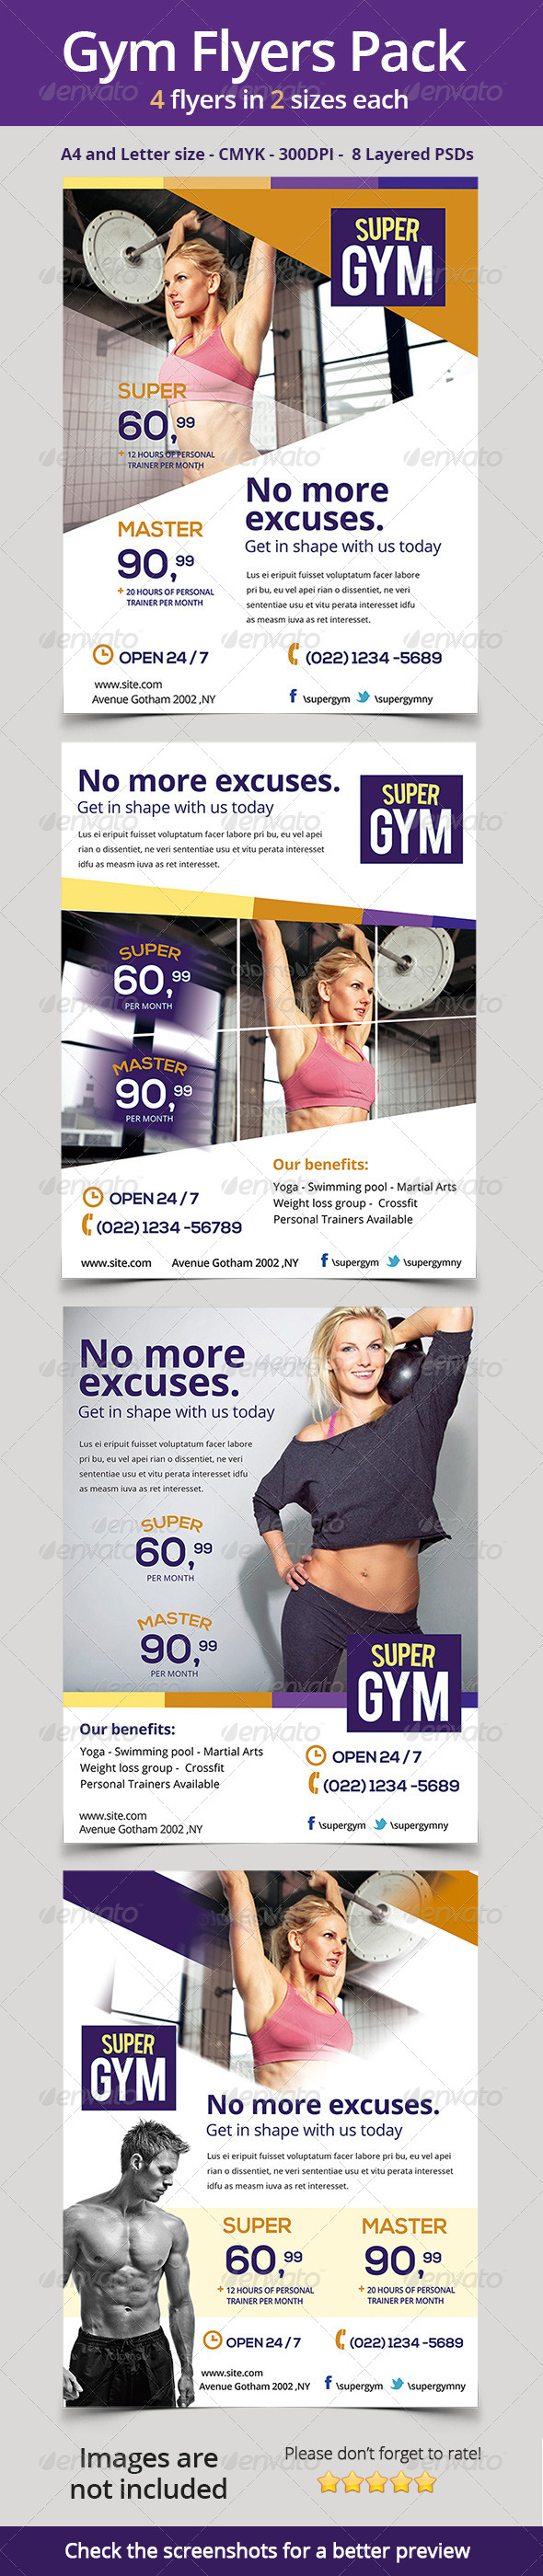 Gym / Fitness Flyers Pack